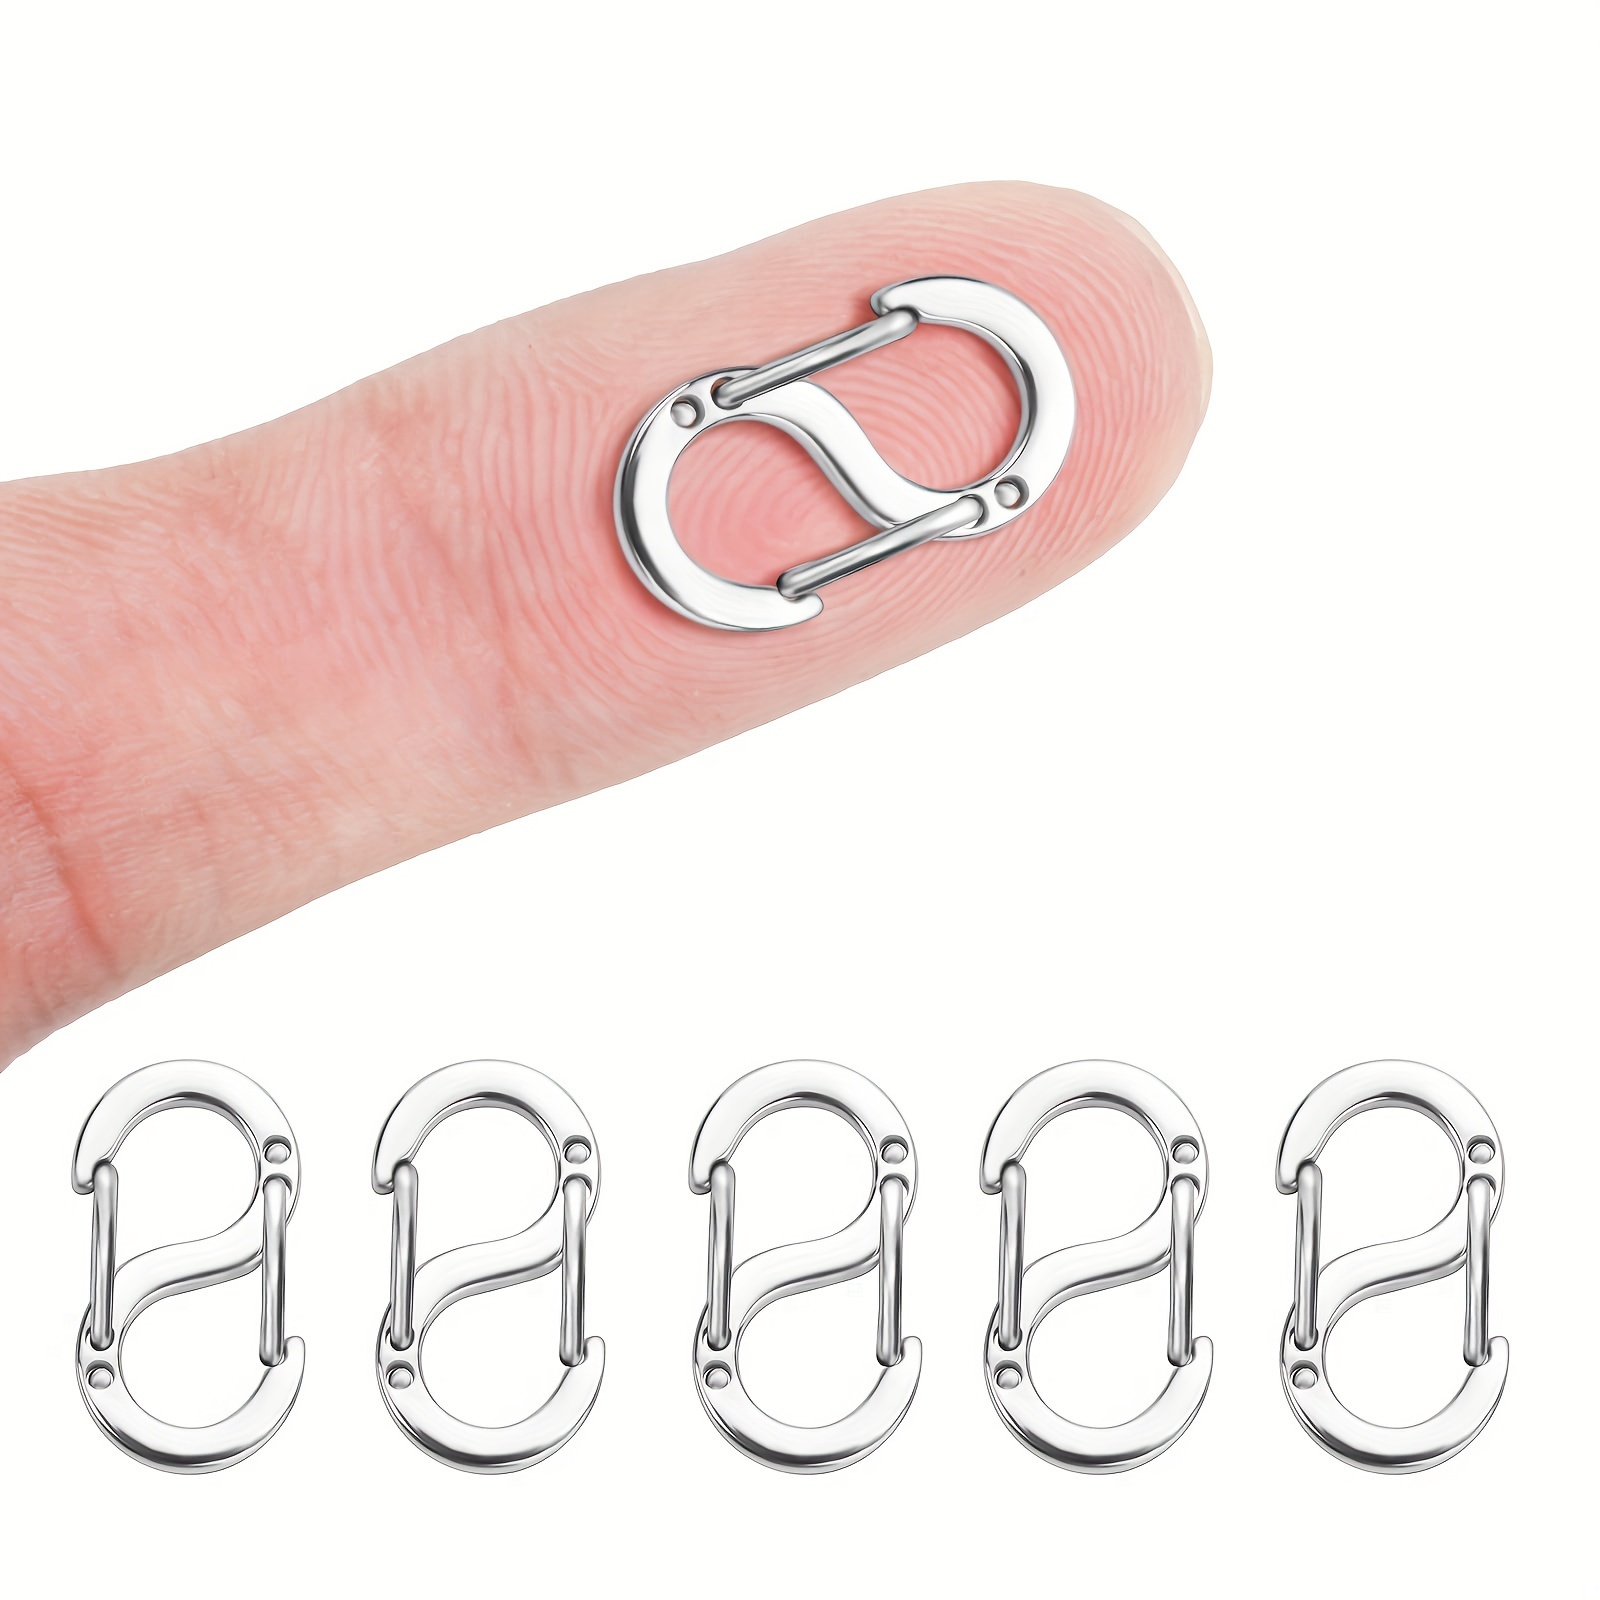 

5pcs Double Opening Shortener Clasp Necklace Clasp And Closures Stainless Steel S Lock Bracelet Connector Necklace Clip For Diy Jewelry Making Accessories